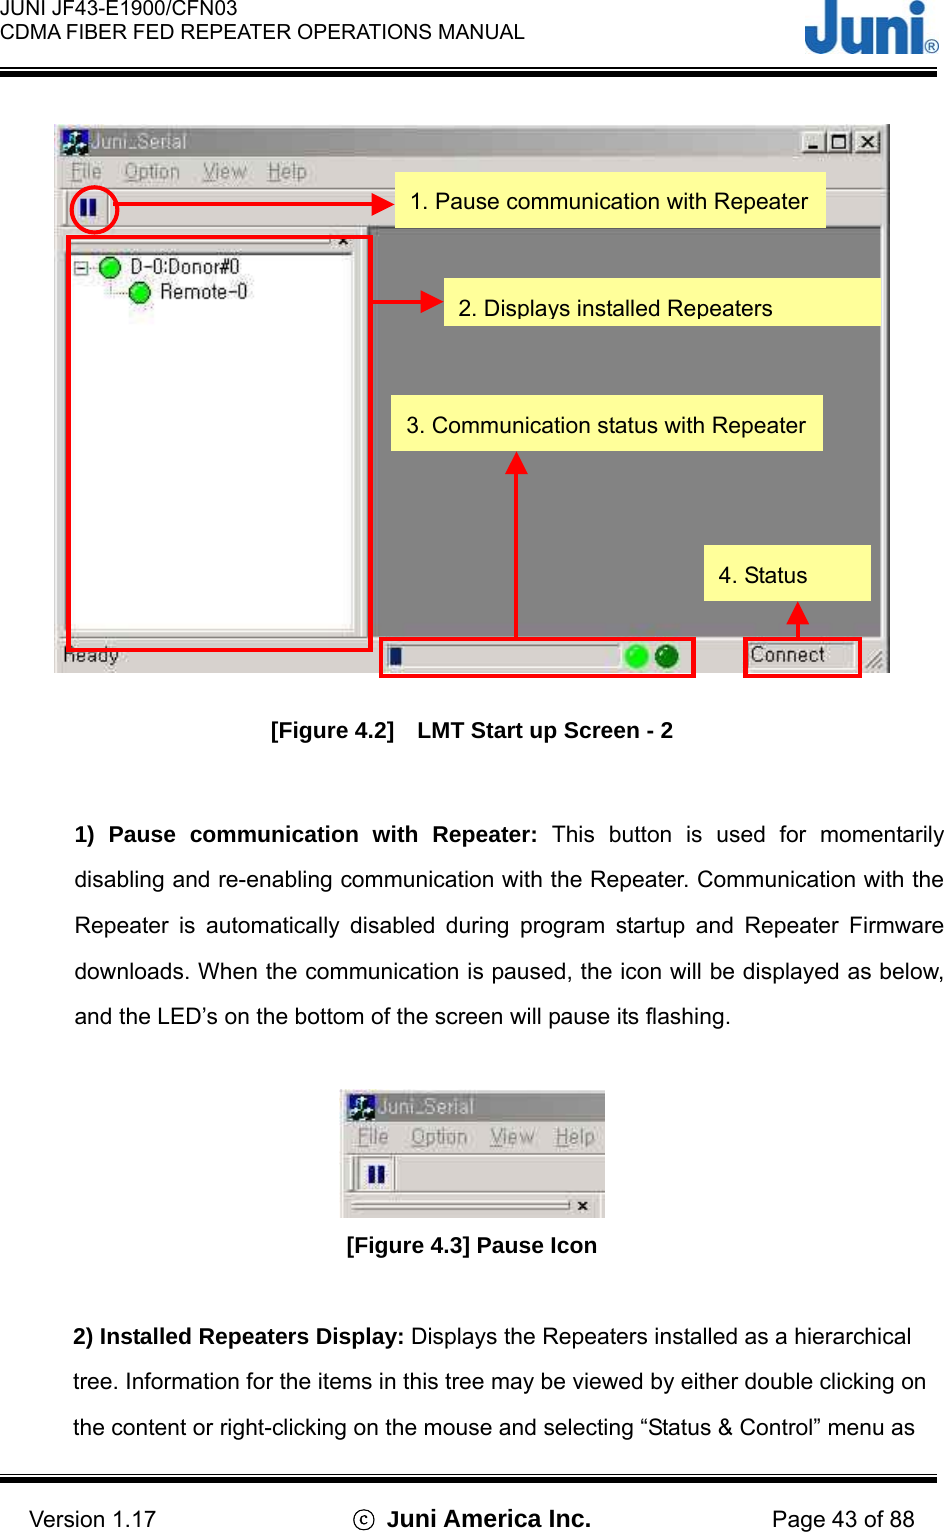  JUNI JF43-E1900/CFN03 CDMA FIBER FED REPEATER OPERATIONS MANUAL                                    Version 1.17  ⓒ Juni America Inc. Page 43 of 88  [Figure 4.2]    LMT Start up Screen - 2  1) Pause communication with Repeater: This button is used for momentarily disabling and re-enabling communication with the Repeater. Communication with the Repeater is automatically disabled during program startup and Repeater Firmware downloads. When the communication is paused, the icon will be displayed as below, and the LED’s on the bottom of the screen will pause its flashing.   [Figure 4.3] Pause Icon  2) Installed Repeaters Display: Displays the Repeaters installed as a hierarchical tree. Information for the items in this tree may be viewed by either double clicking on the content or right-clicking on the mouse and selecting “Status &amp; Control” menu as 1. Pause communication with Repeater 2. Displays installed Repeaters 3. Communication status with Repeater 4. Status 